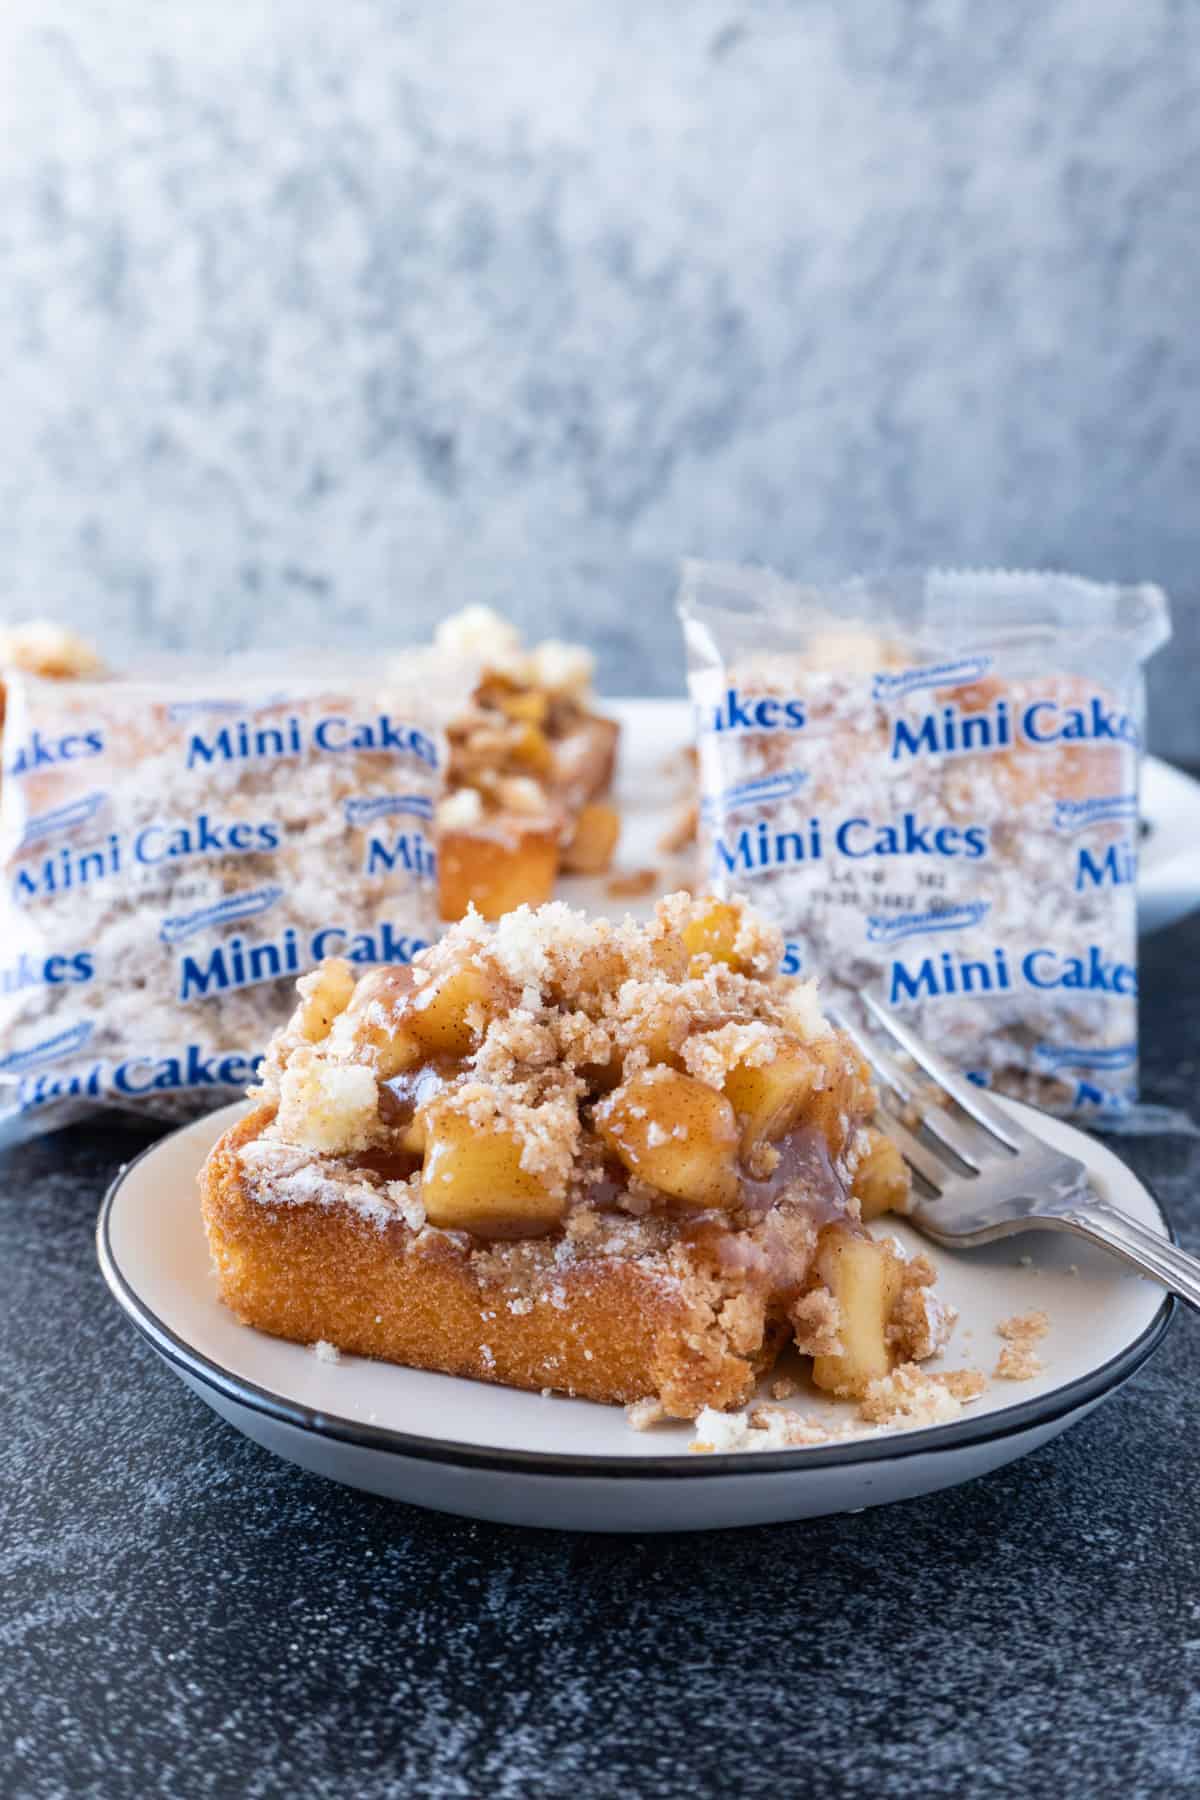 Apple Cobbler Cake next to Crumb Cakes in packages